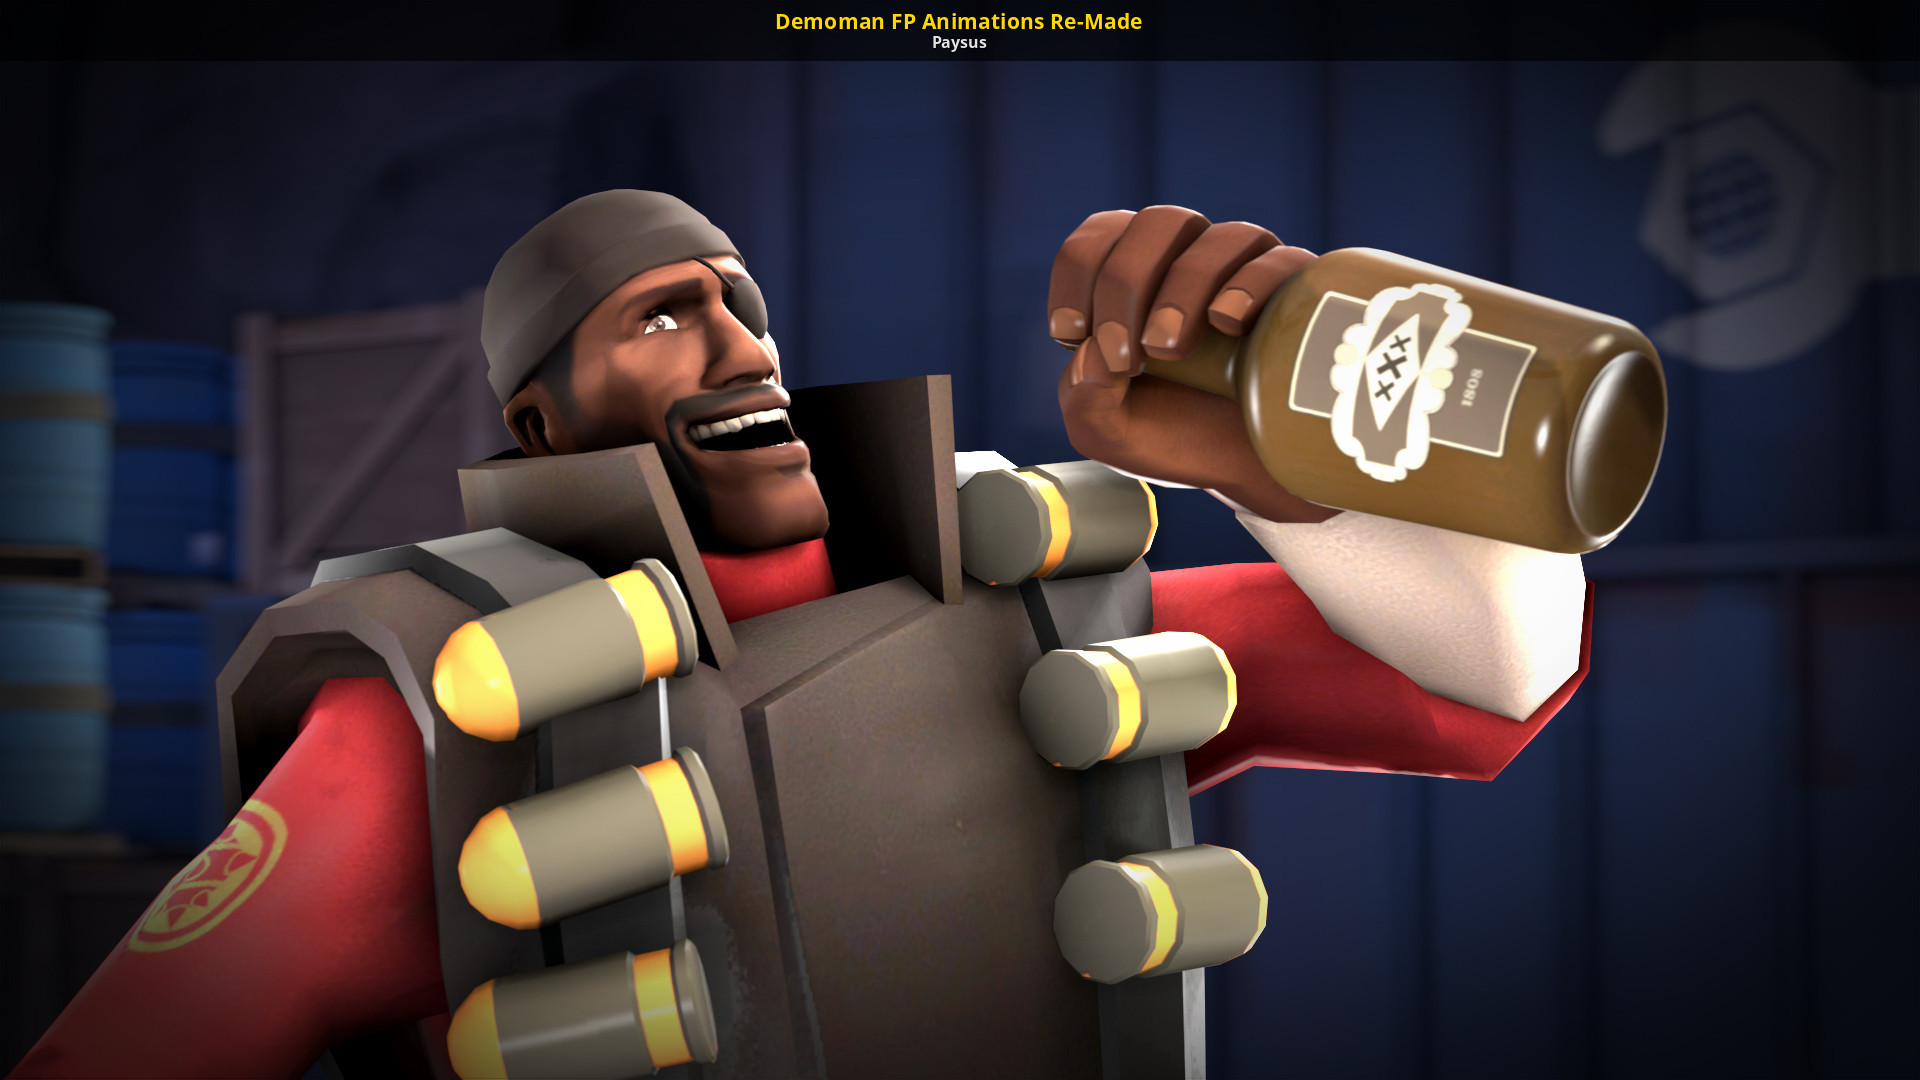 Demoman FP Animations Re-Made Team Fortress 2 Works In Progress.